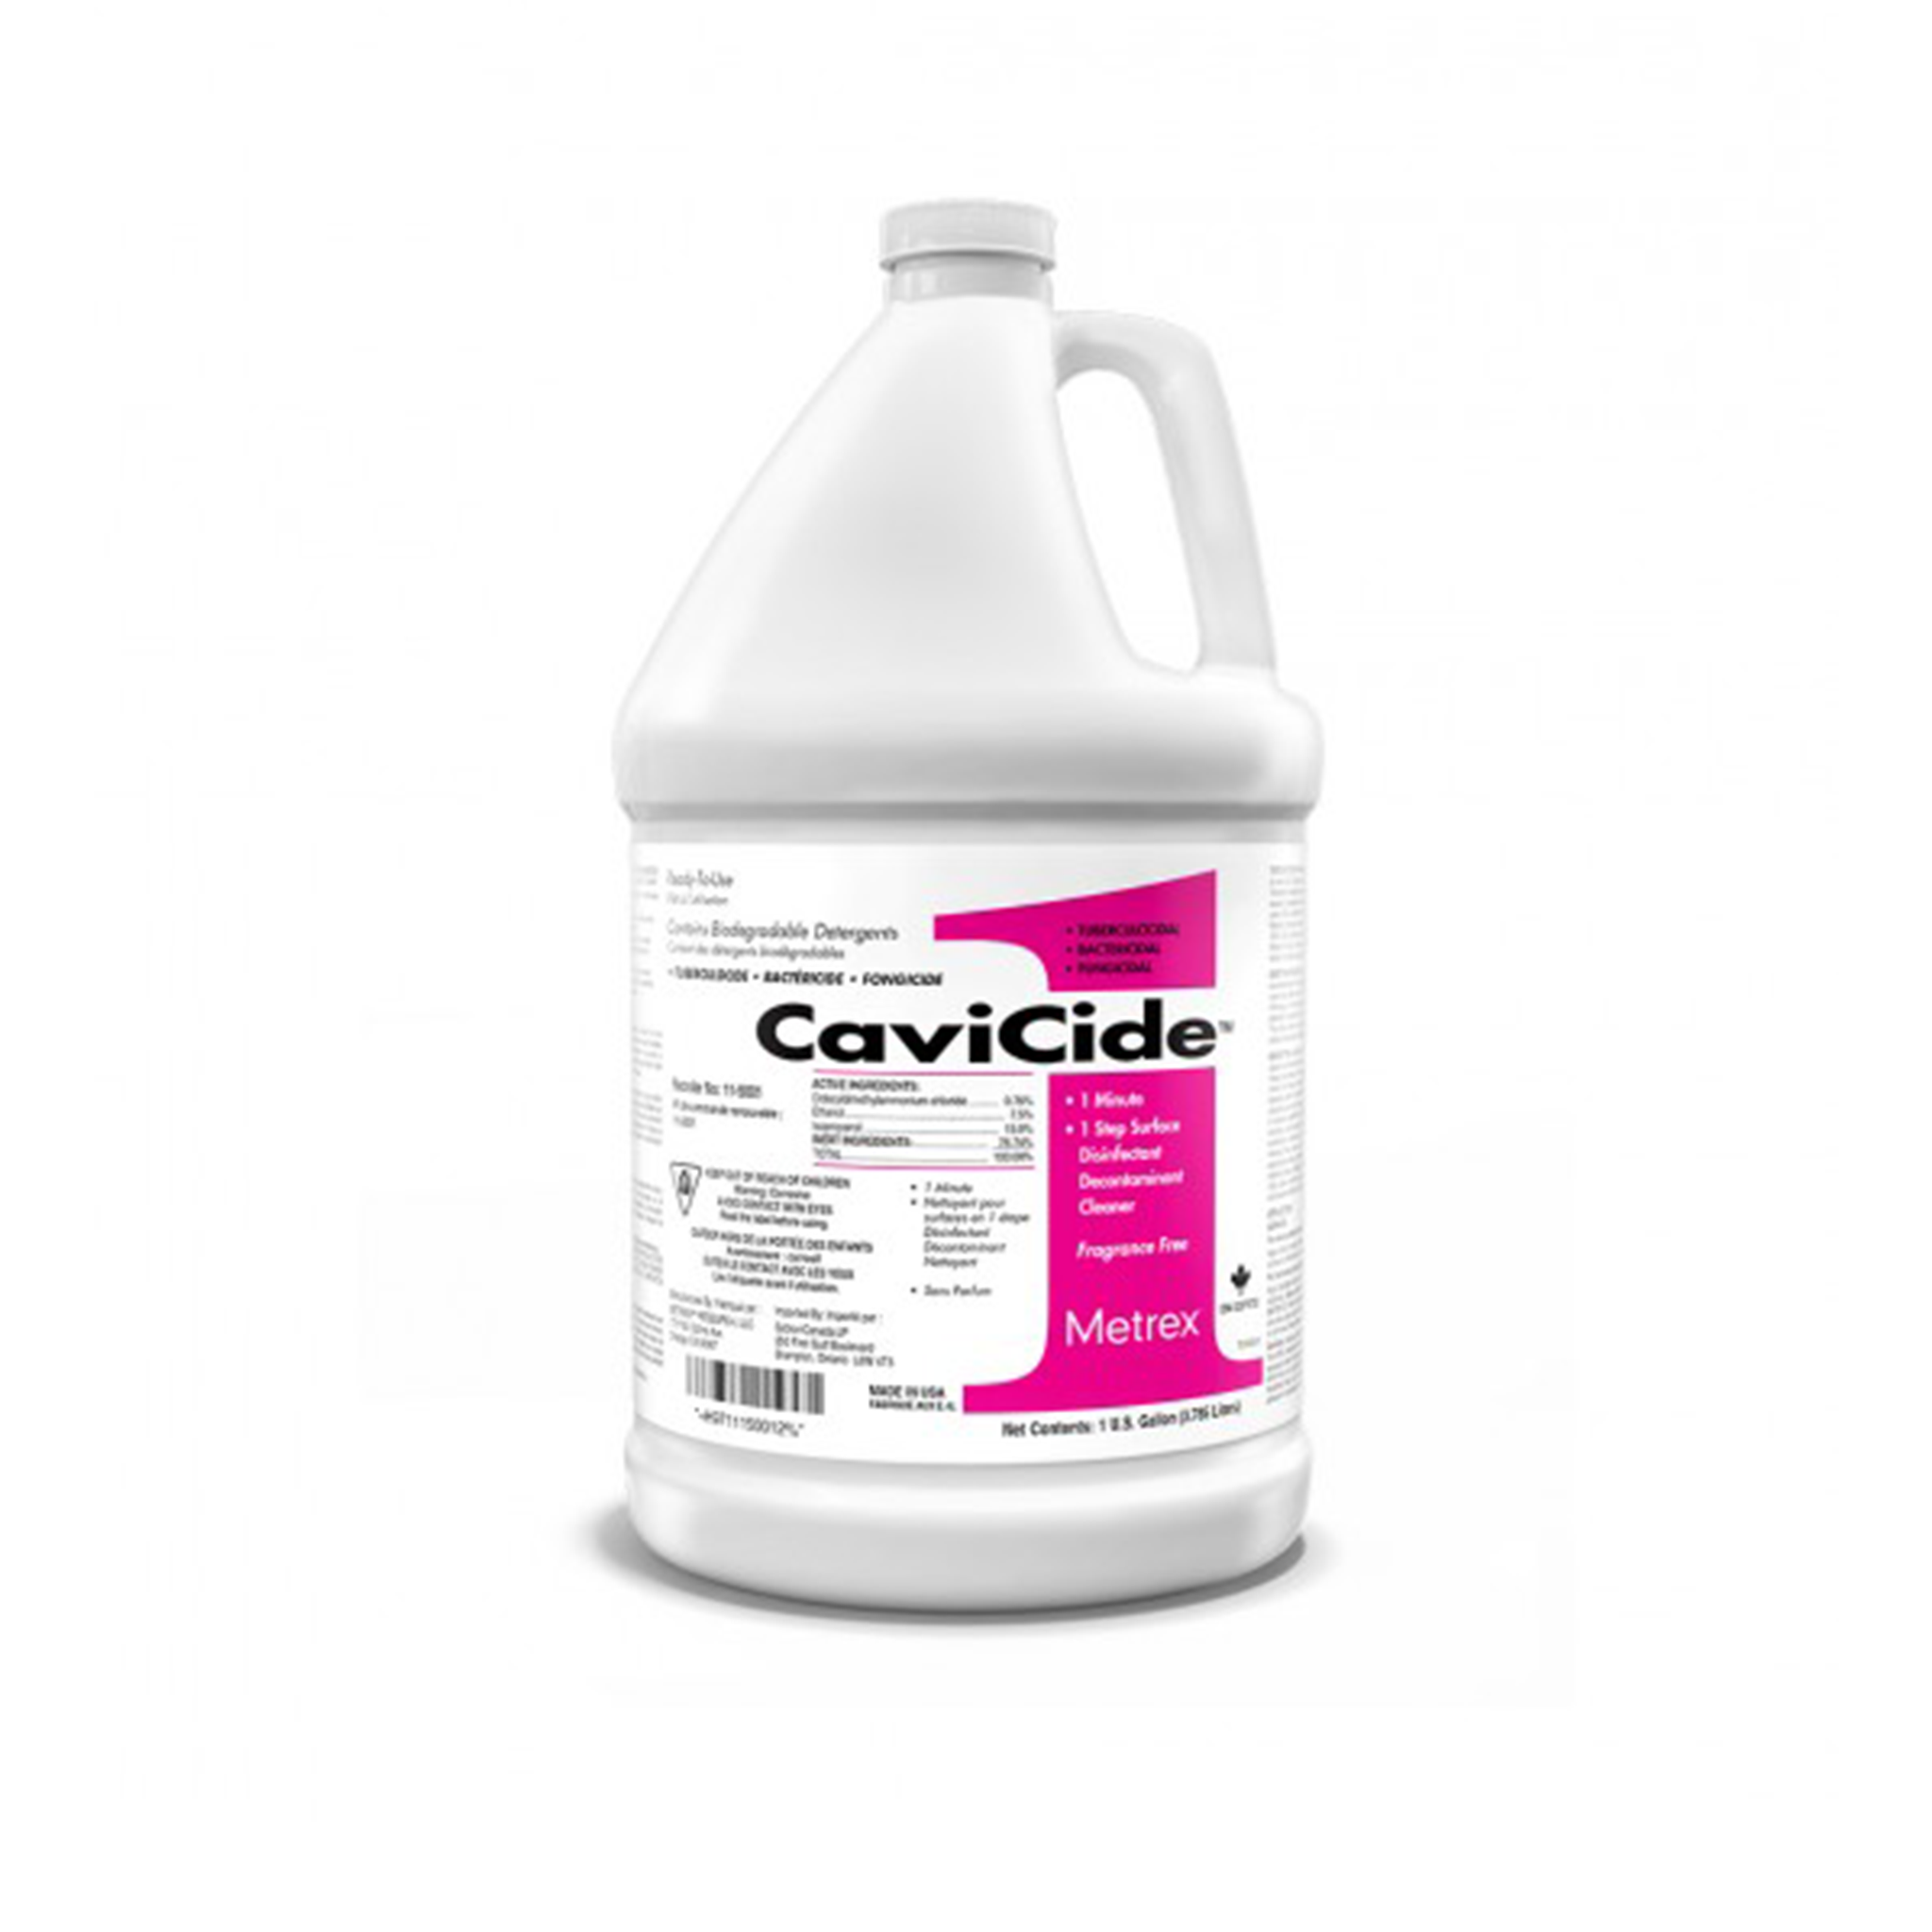 CaviCide1 Surface Disinfectant - 1 gallon